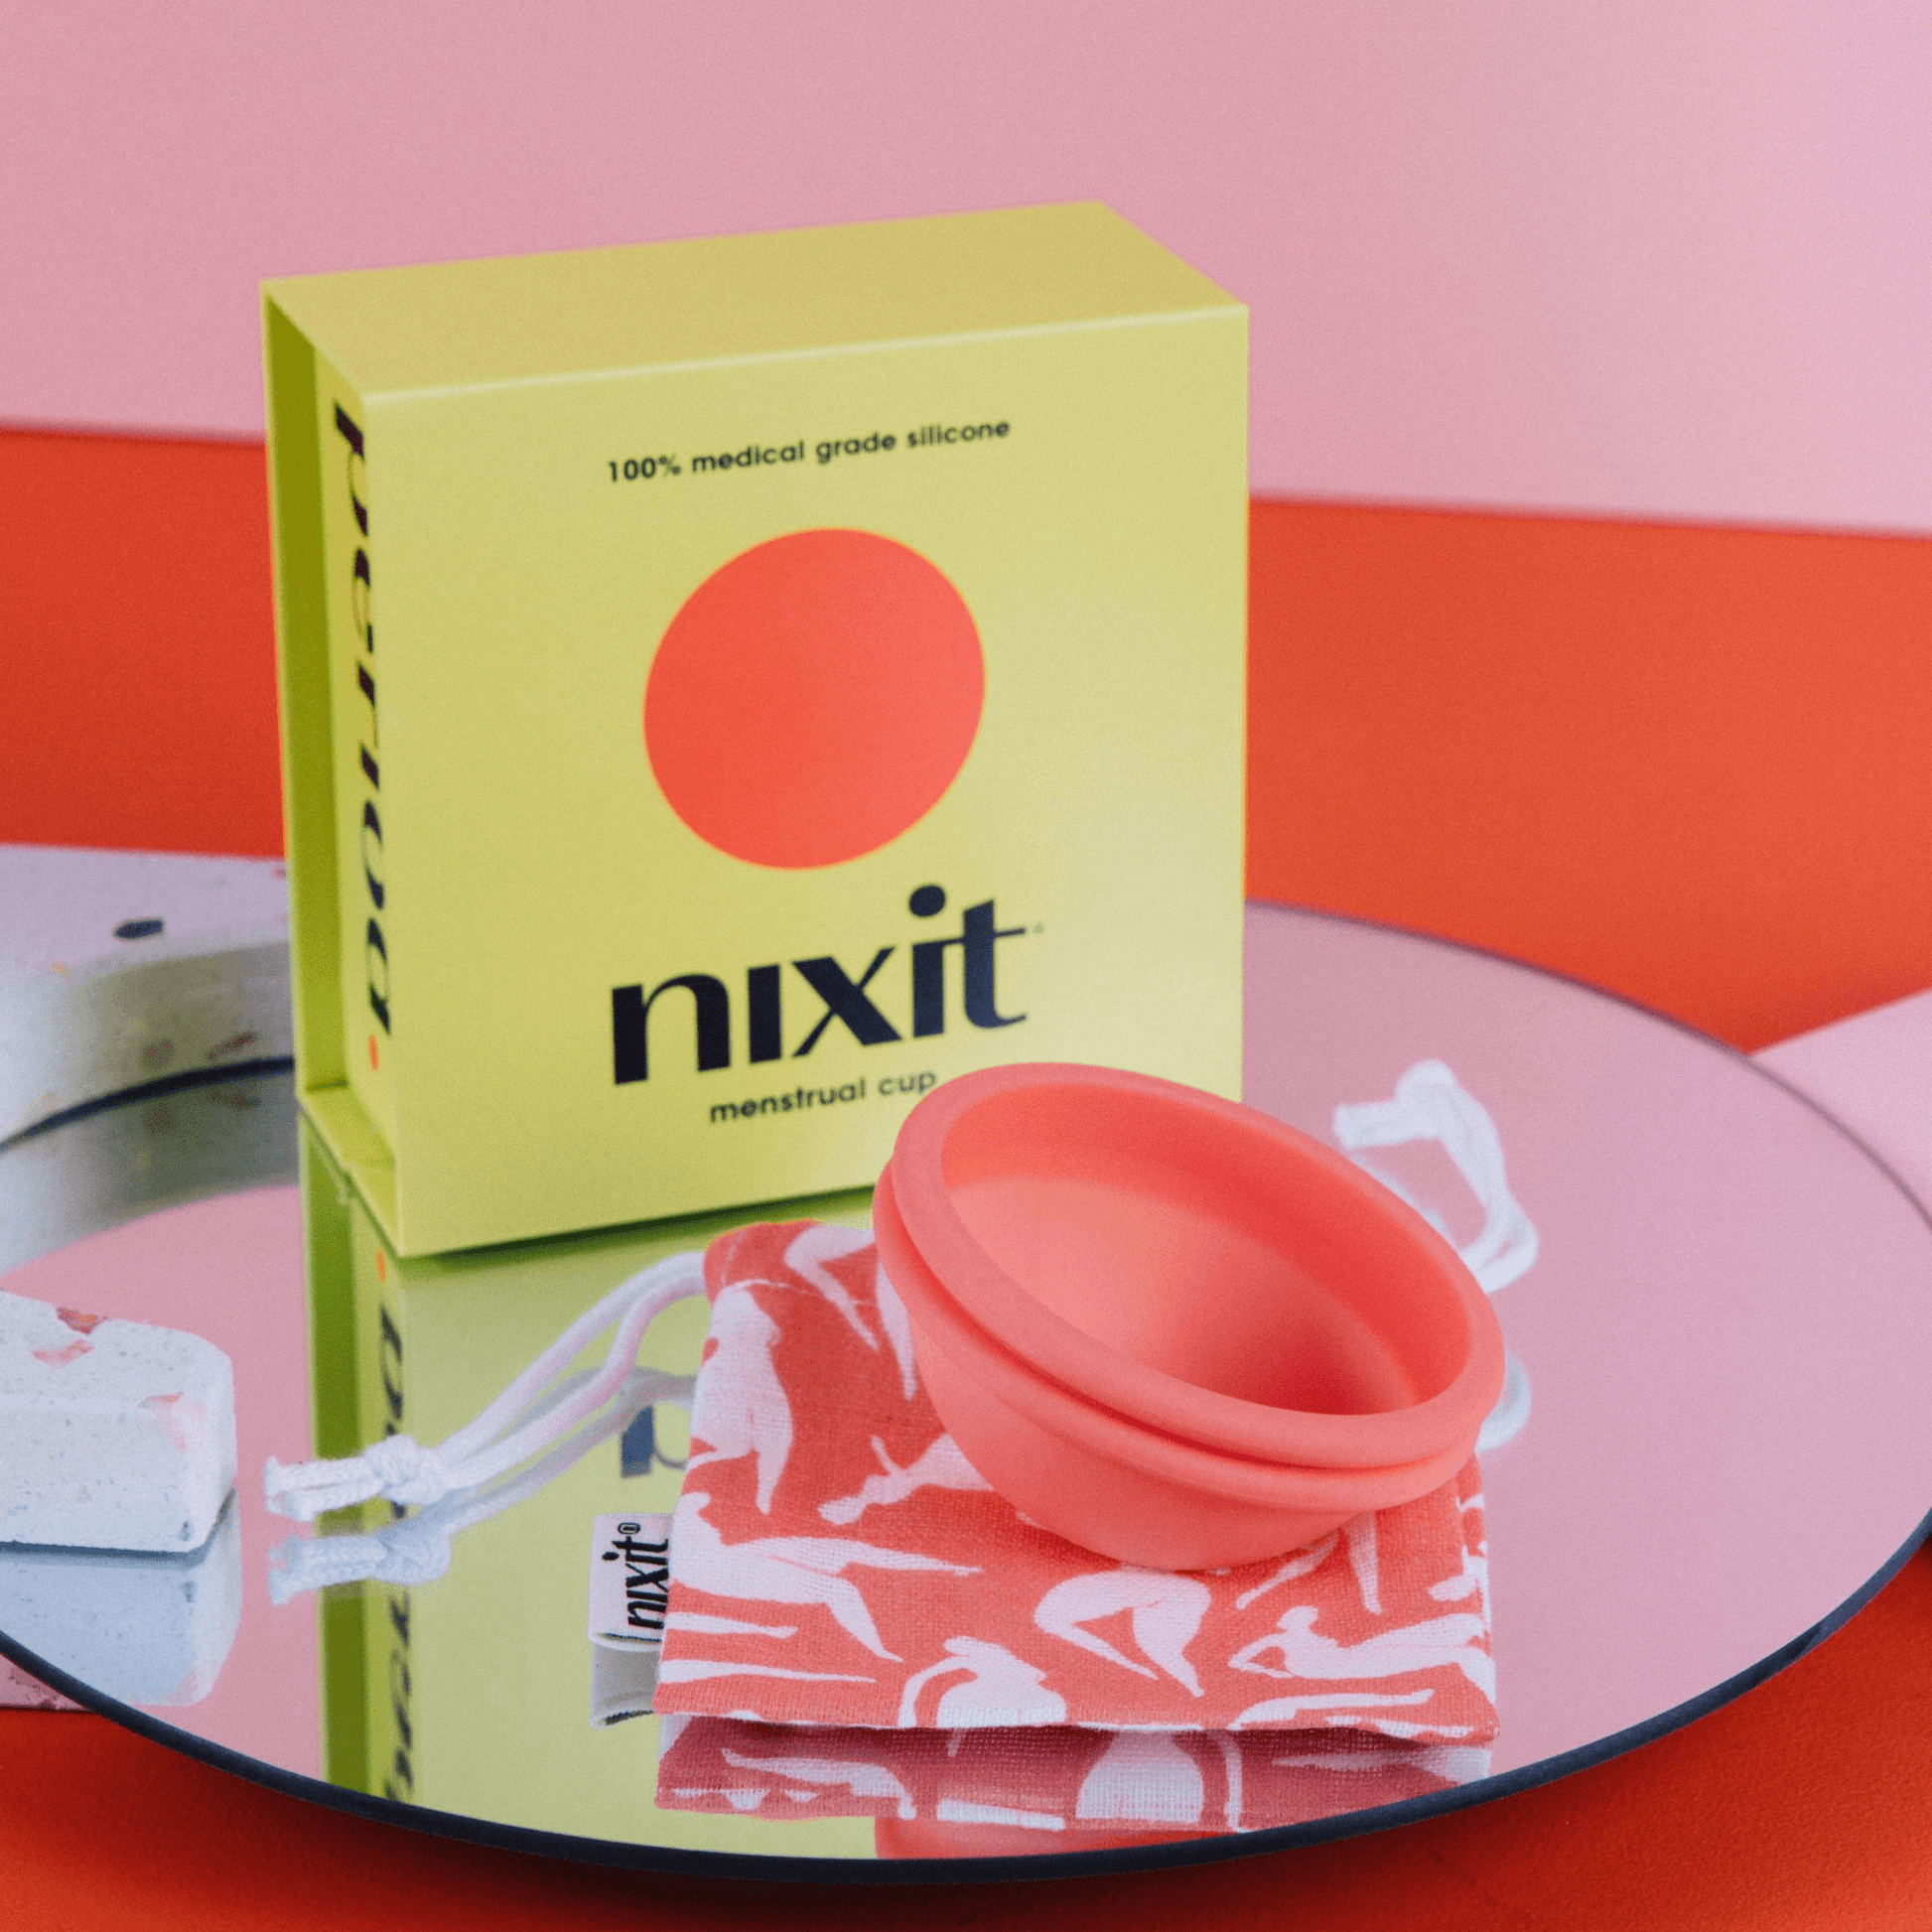 Nixit Menstrual Cup – The Soap Dispensary and Kitchen Staples